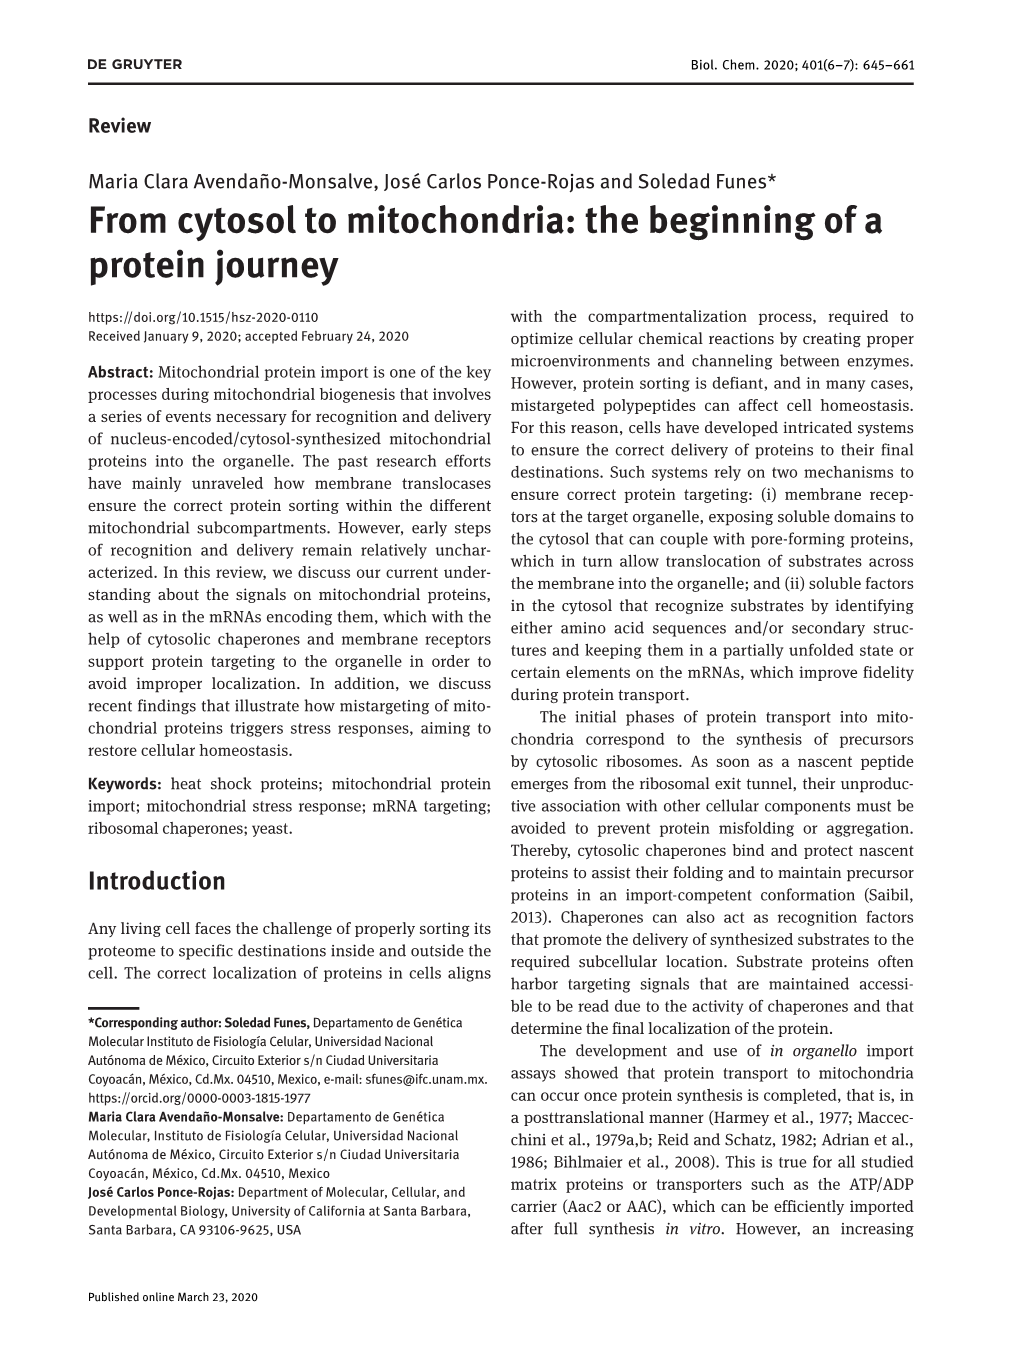 From Cytosol to Mitochondria: the Beginning of a Protein Journey